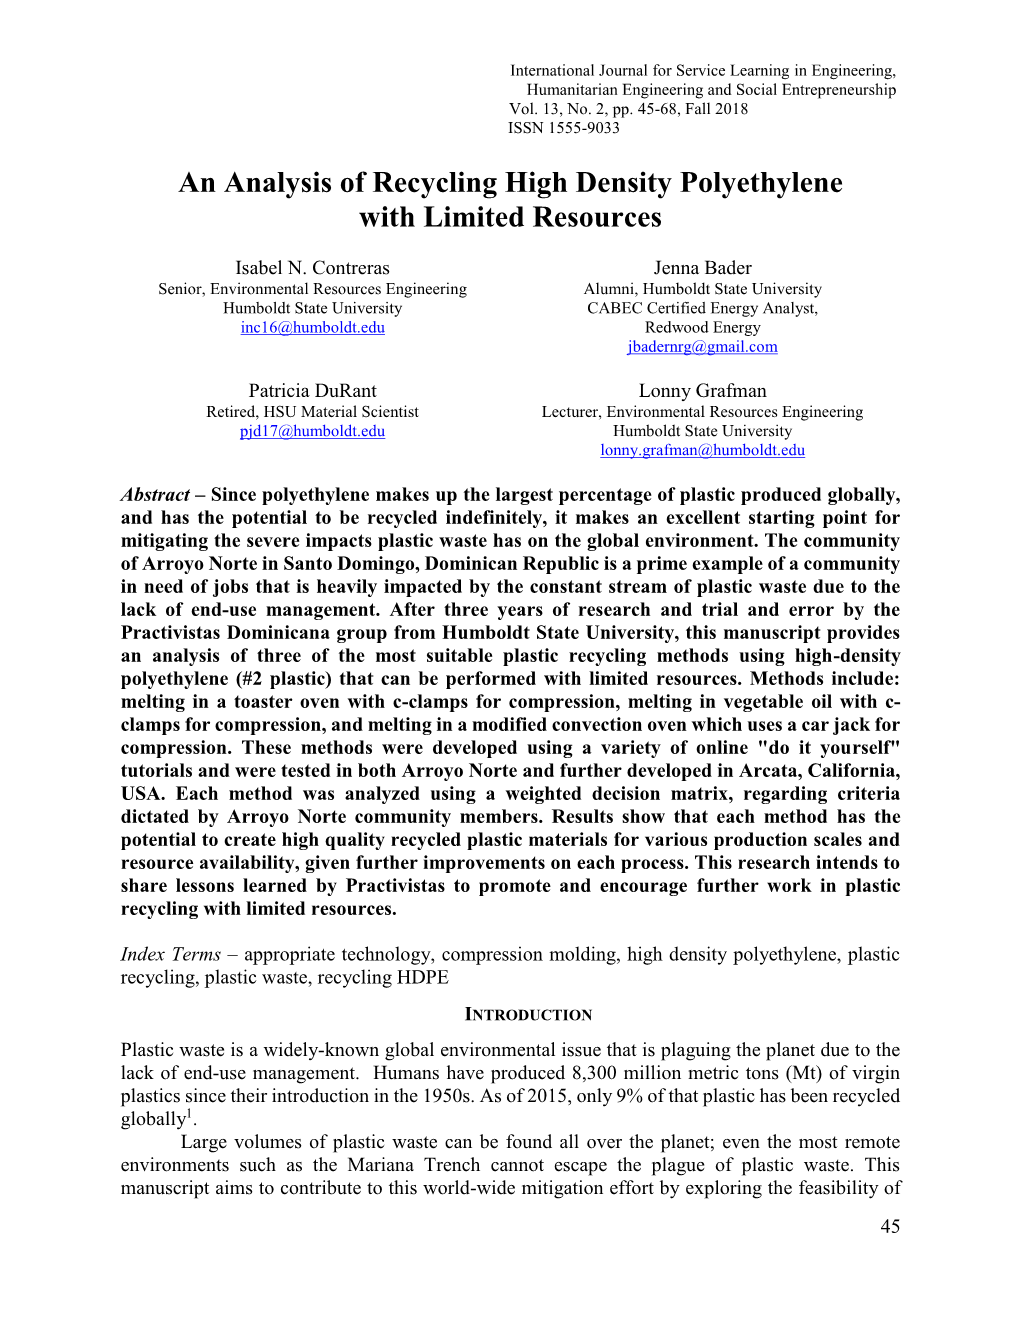 An Analysis of Recycling High Density Polyethylene with Limited Resources